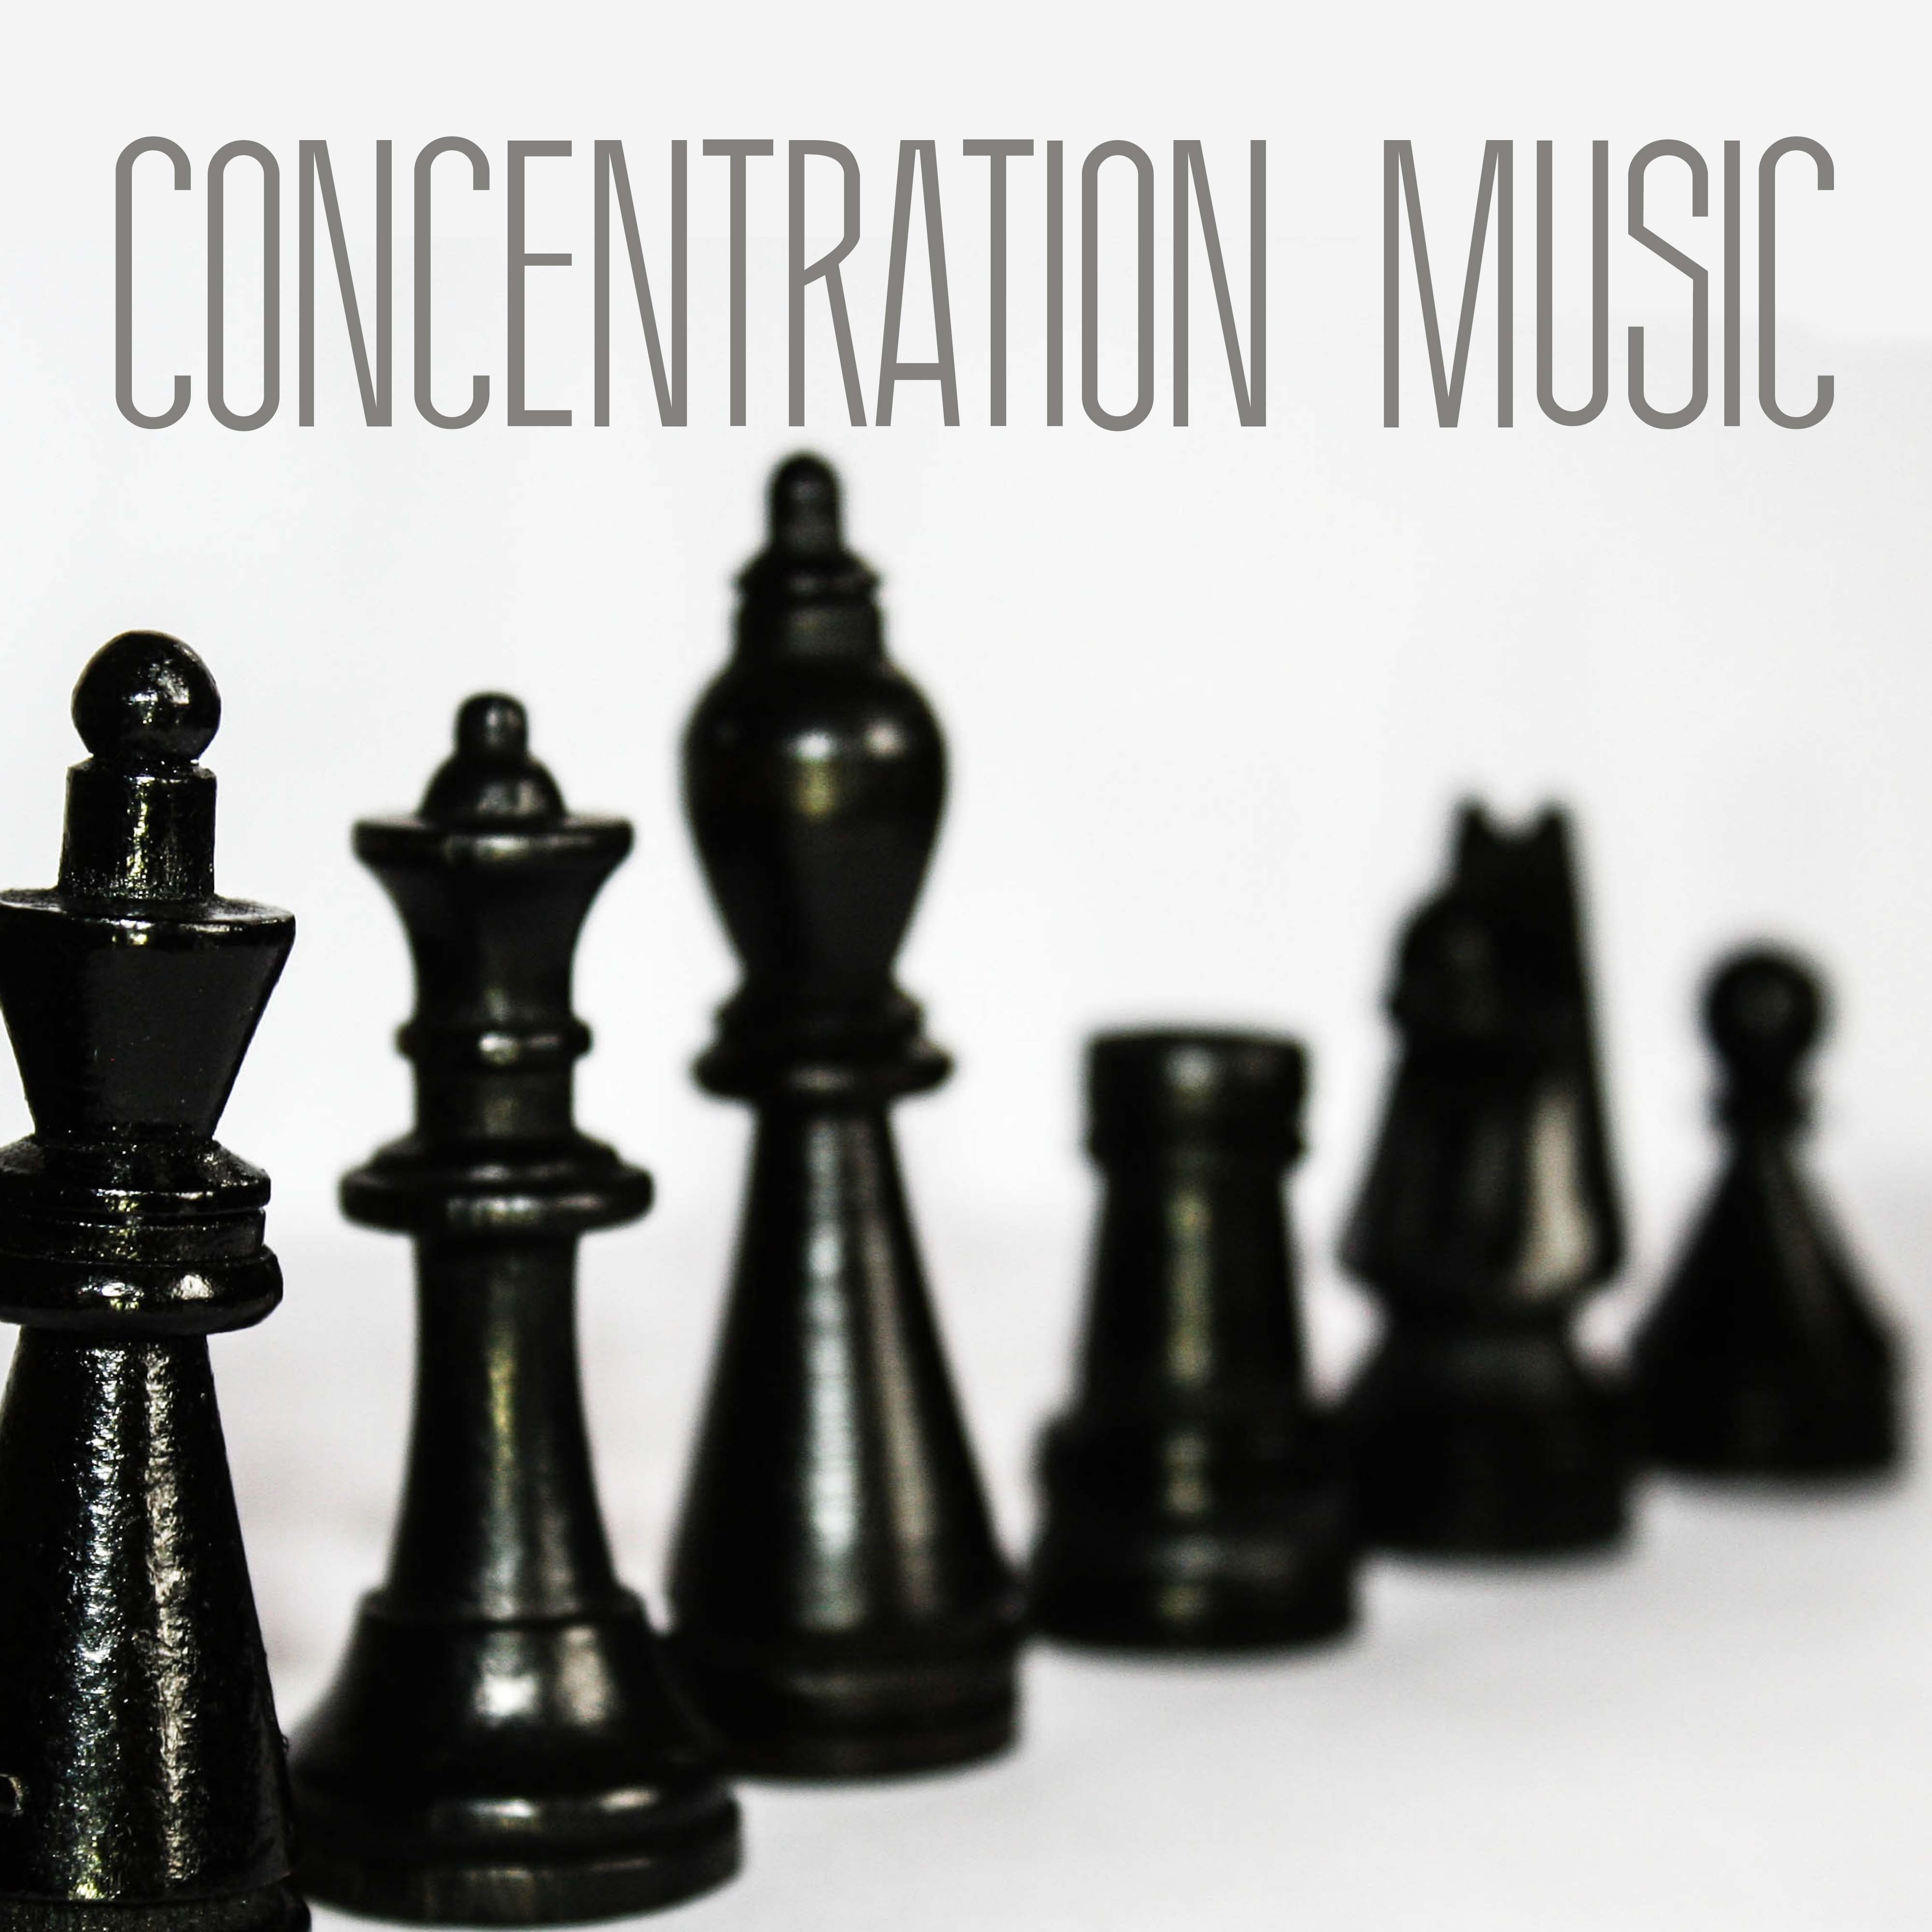 Concentration Music - Best Study Tracks for Exam Preparation